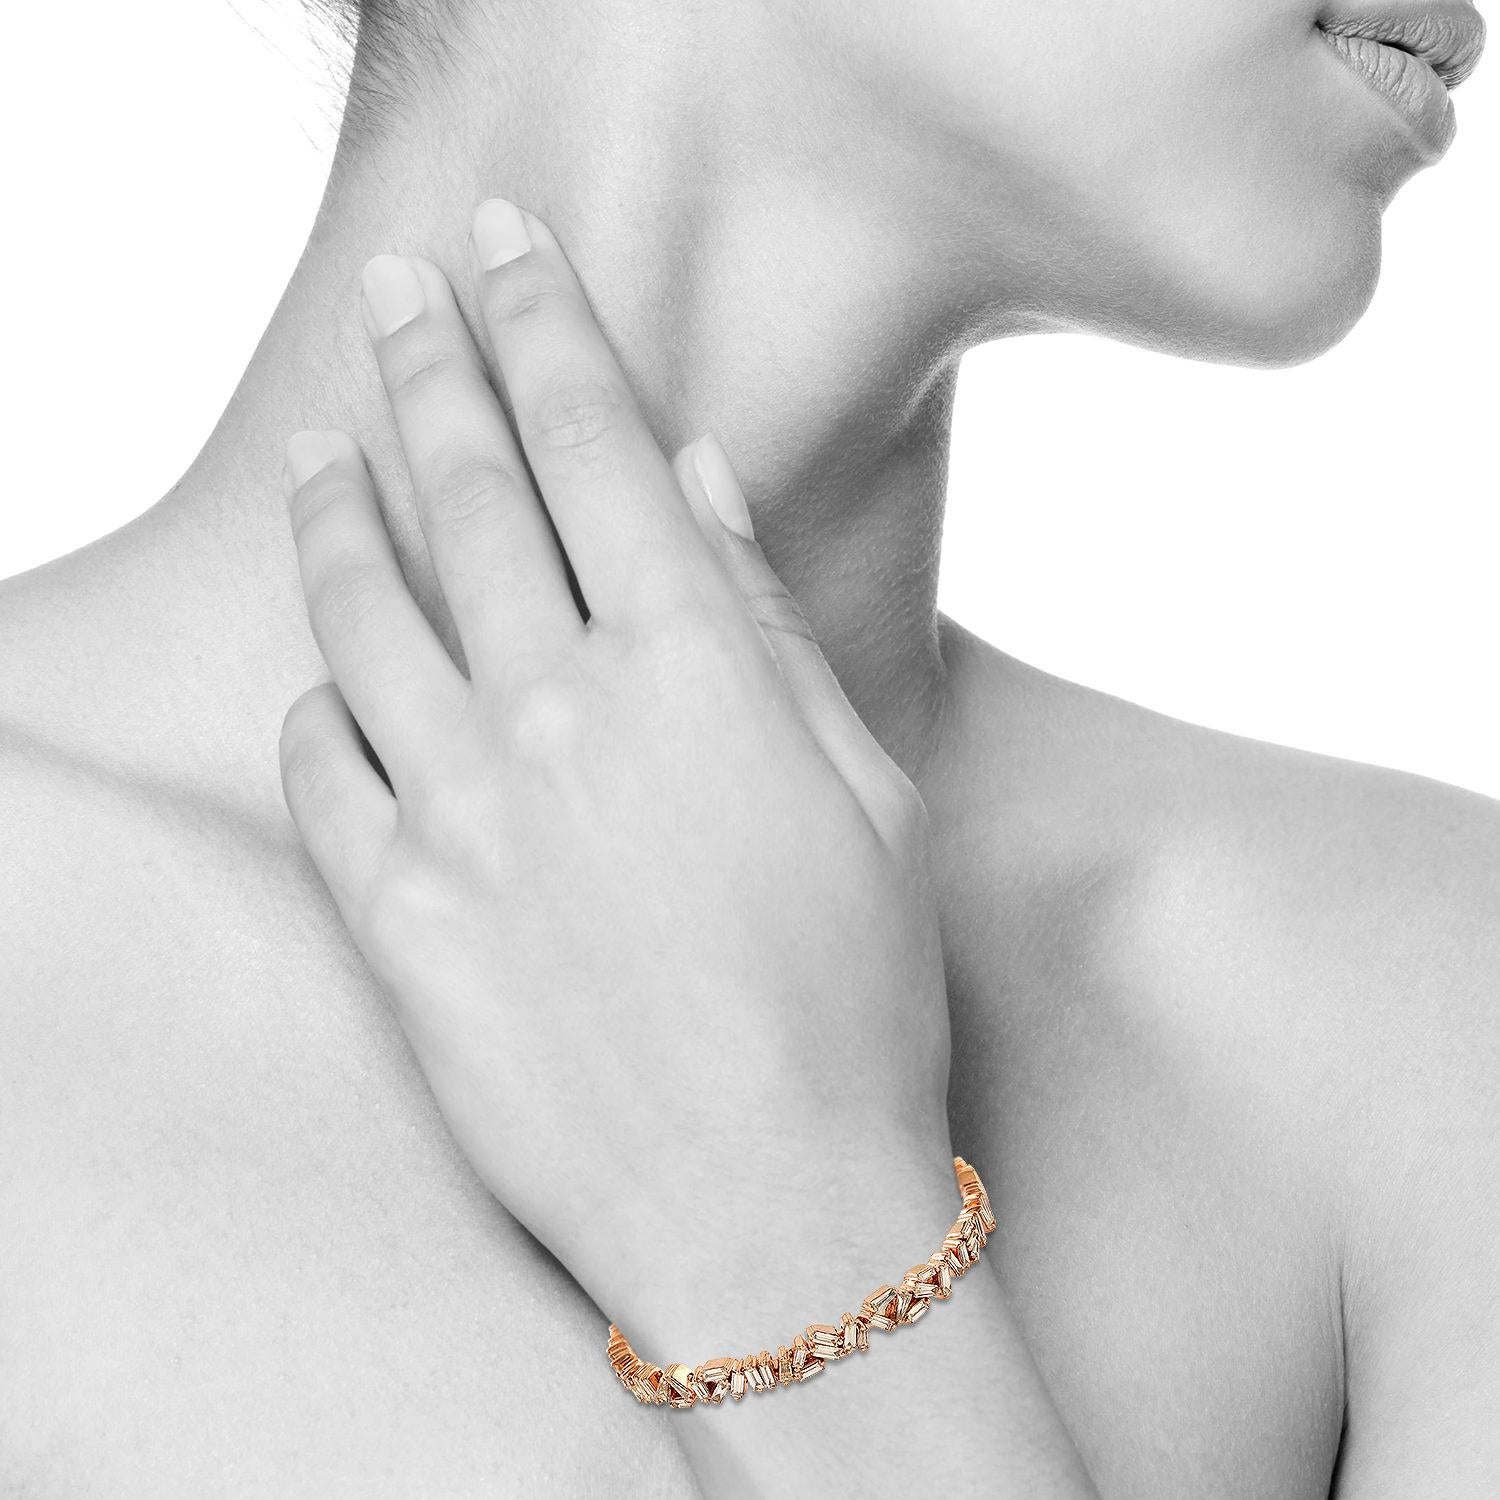 A stunning bracelet handmade in 18K rose gold. It is set in 2.79 carats of baguette diamonds. Wear it alone or stack it with your favorite pieces. Bangle circumference is 6-in. Bangle is 3/16-in. wide. Chain Opening measures 1/2-in. across

FOLLOW 